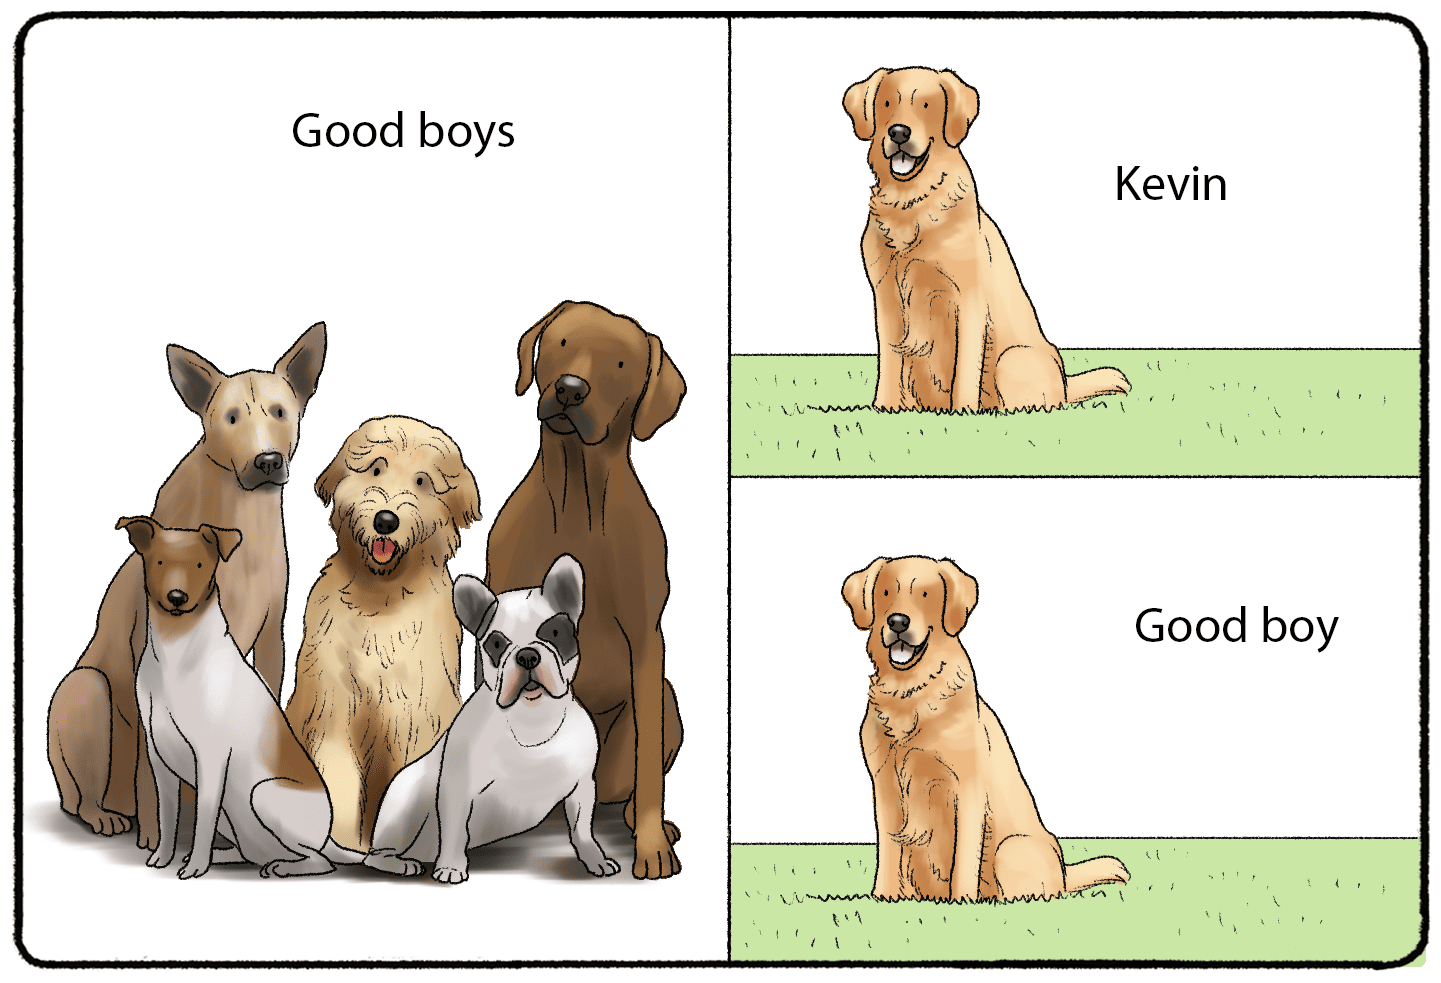 Kevin is a good boy (as discovered by deductive reasoning)